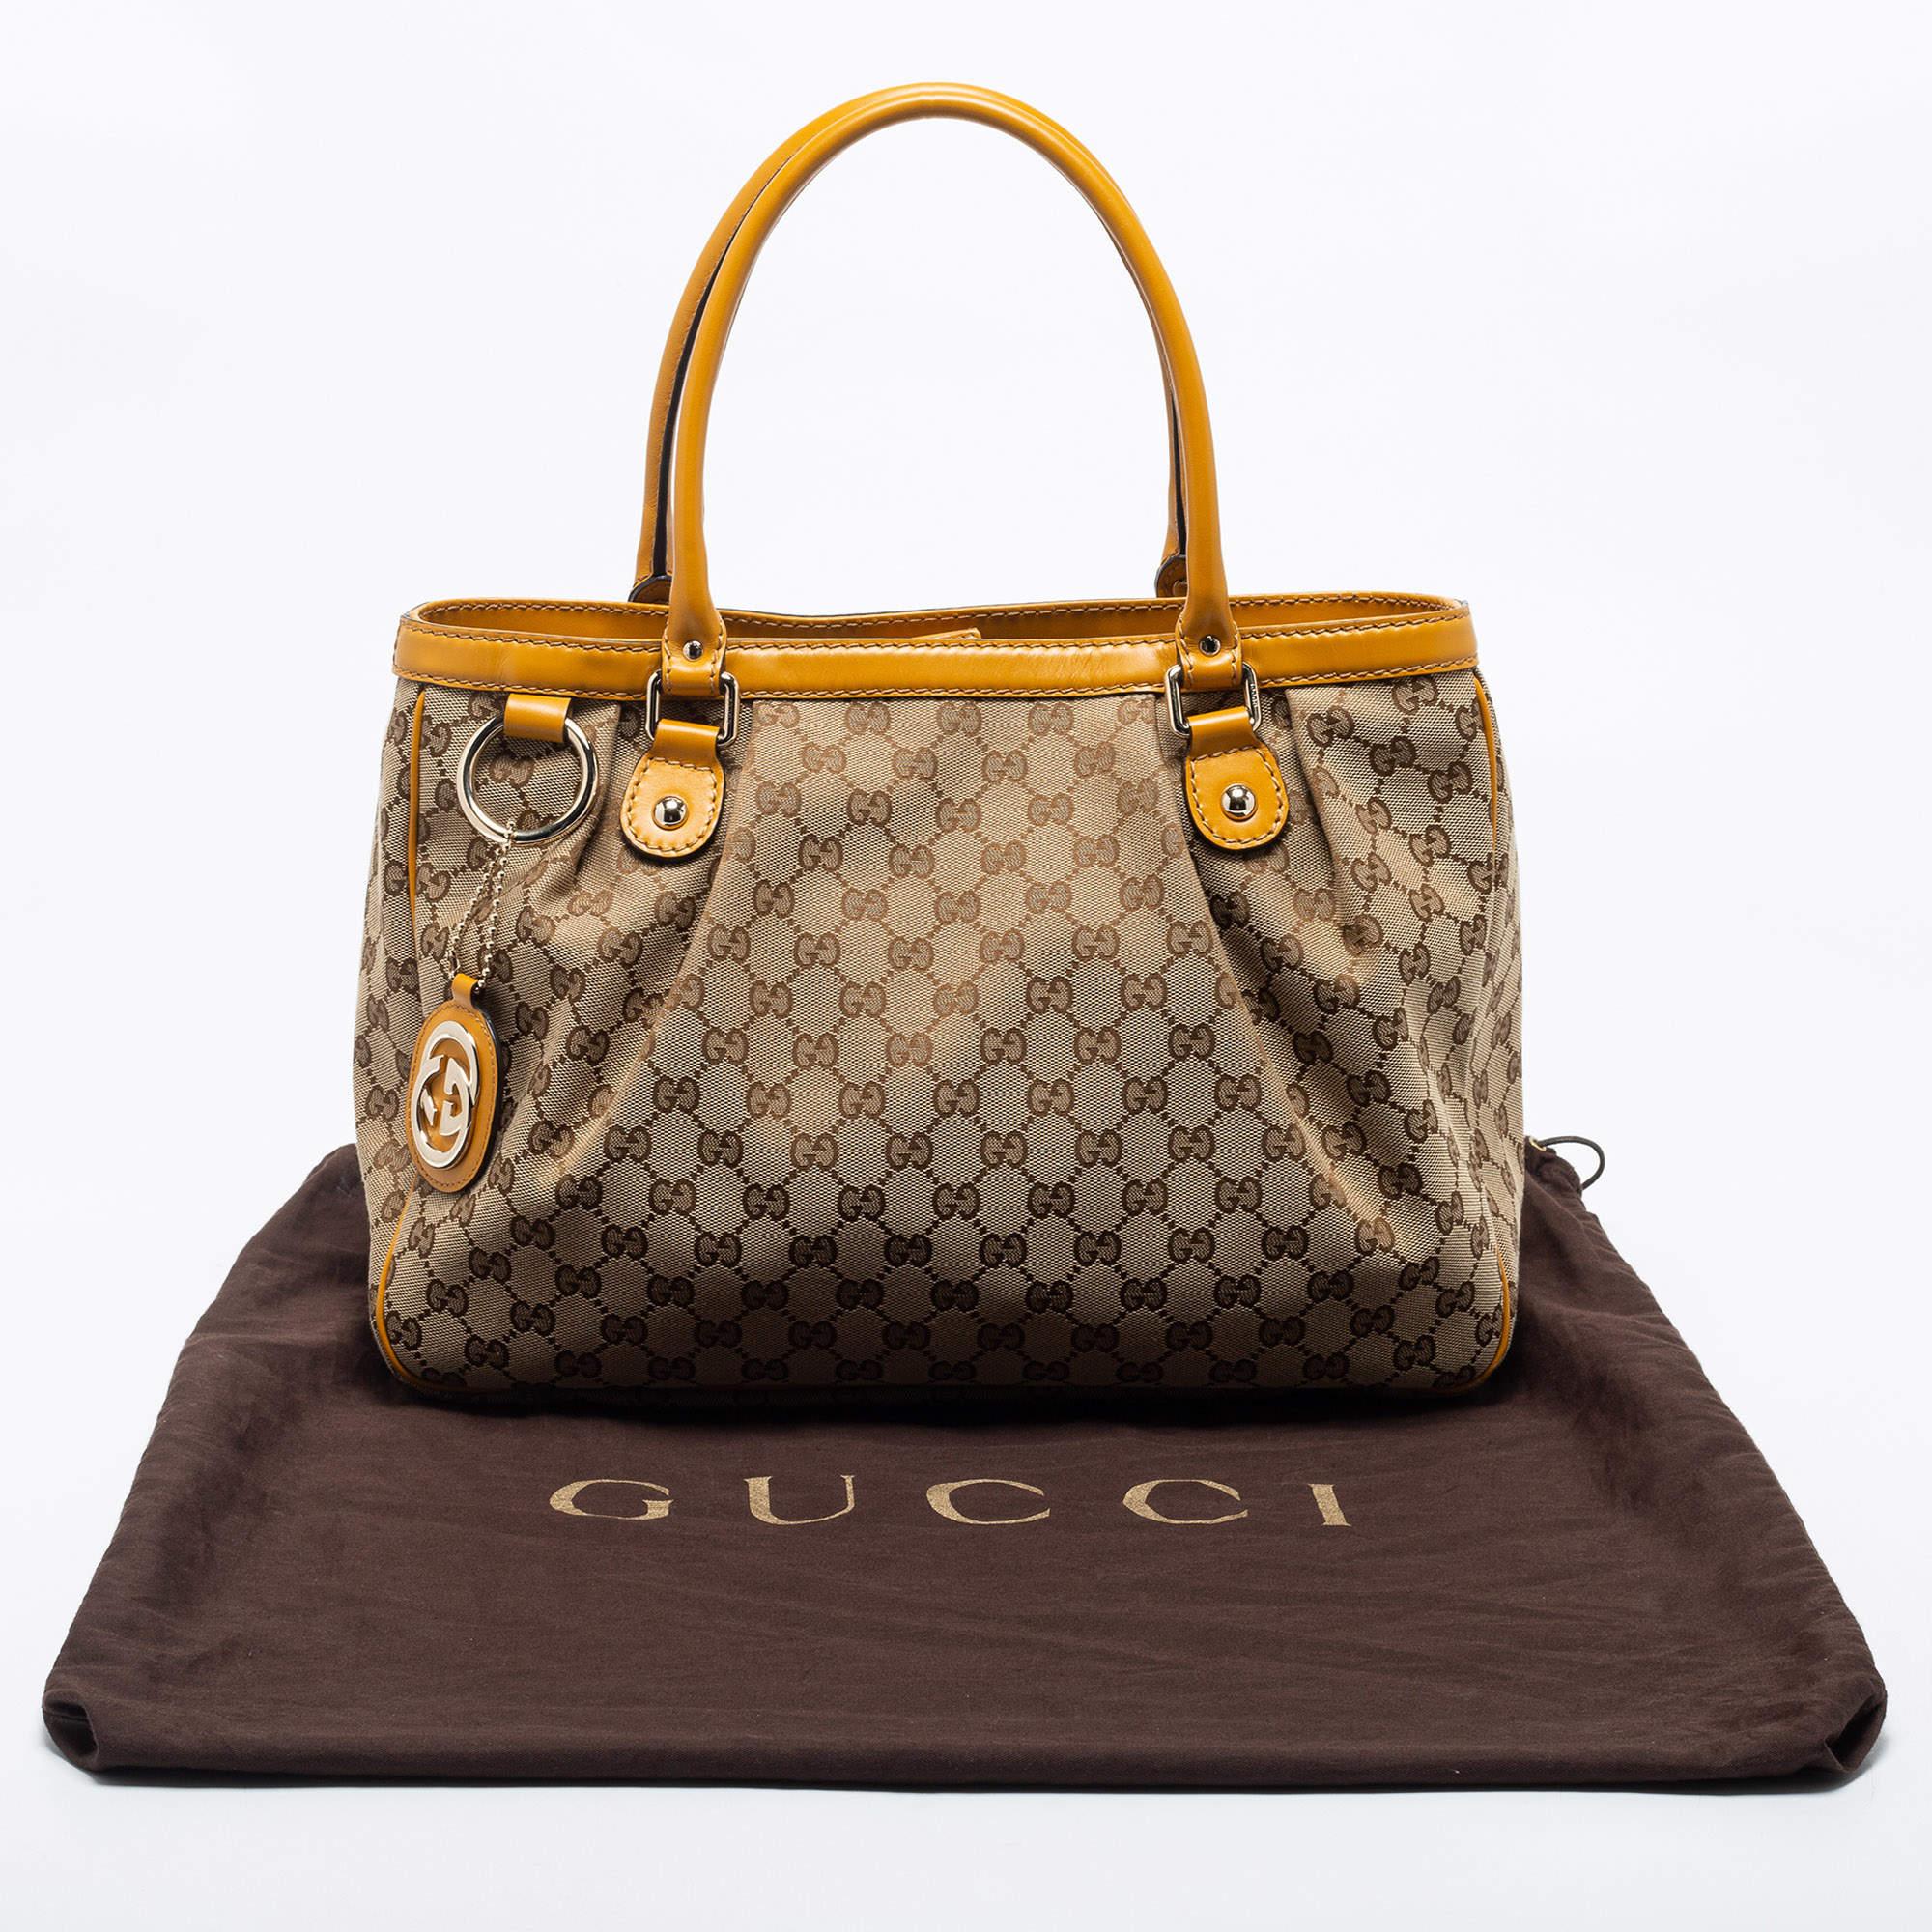 Gucci Beige GG Canvas and Leather Medium Sukey Tote 10